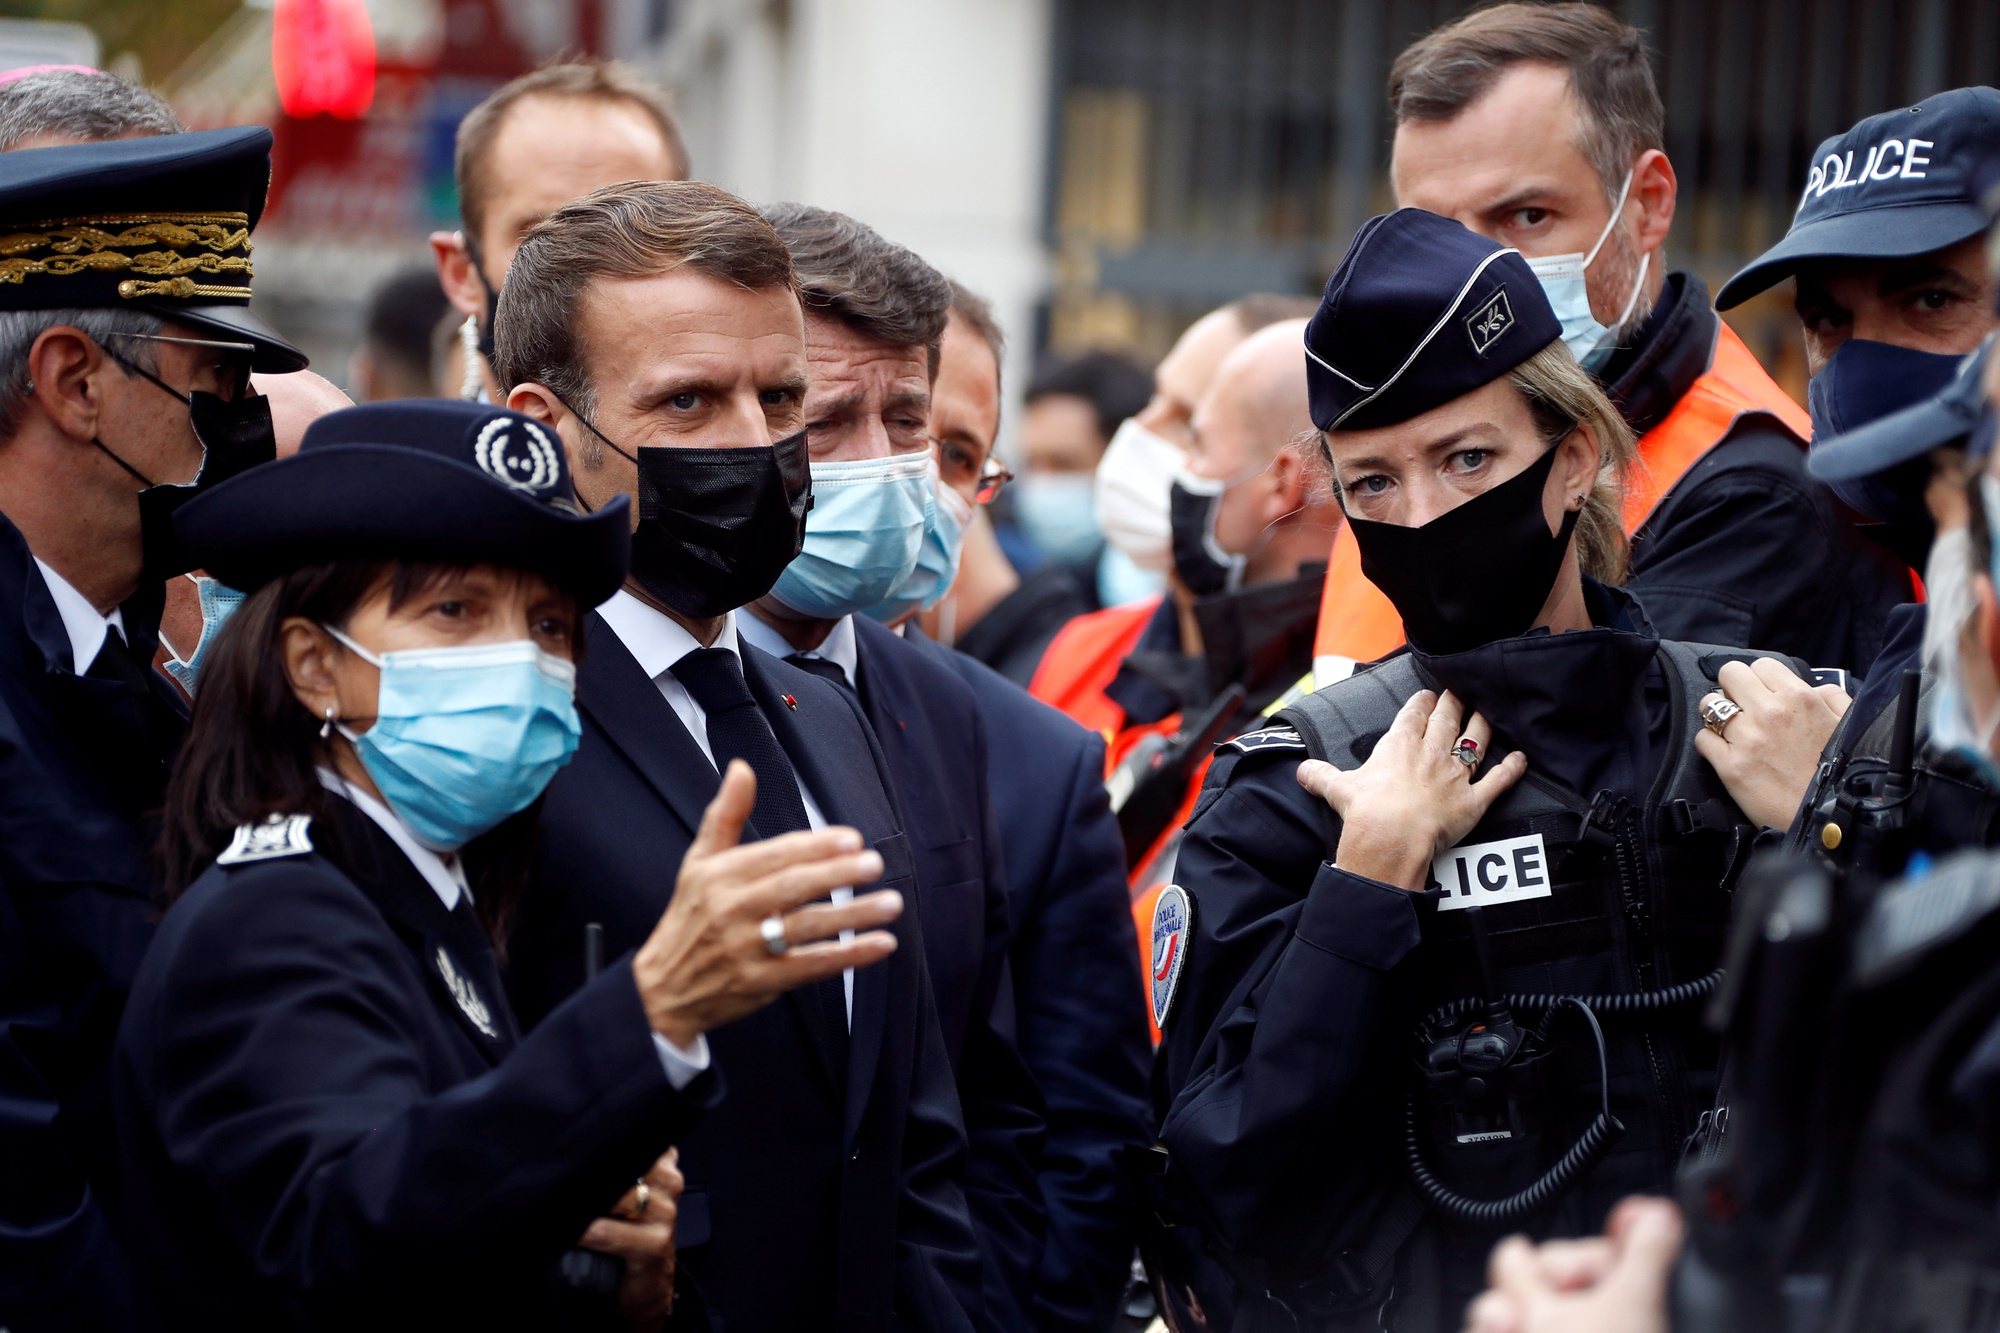 epa08783078 French President Emmanuel Macron (2-L) and Nice Mayor Christian Estrosi (3-L) visit the scene of a reported knife attack at Notre Dame church in Nice, France, 29 October 2020. According to recent reports, at least three people are reported to have died in what officials treat as a terror attack. The attack comes less than a month after the beheading of a French middle school teacher in Paris on 16 October.  EPA/ERIC GAILLARD / POOL  MAXPPP OUT